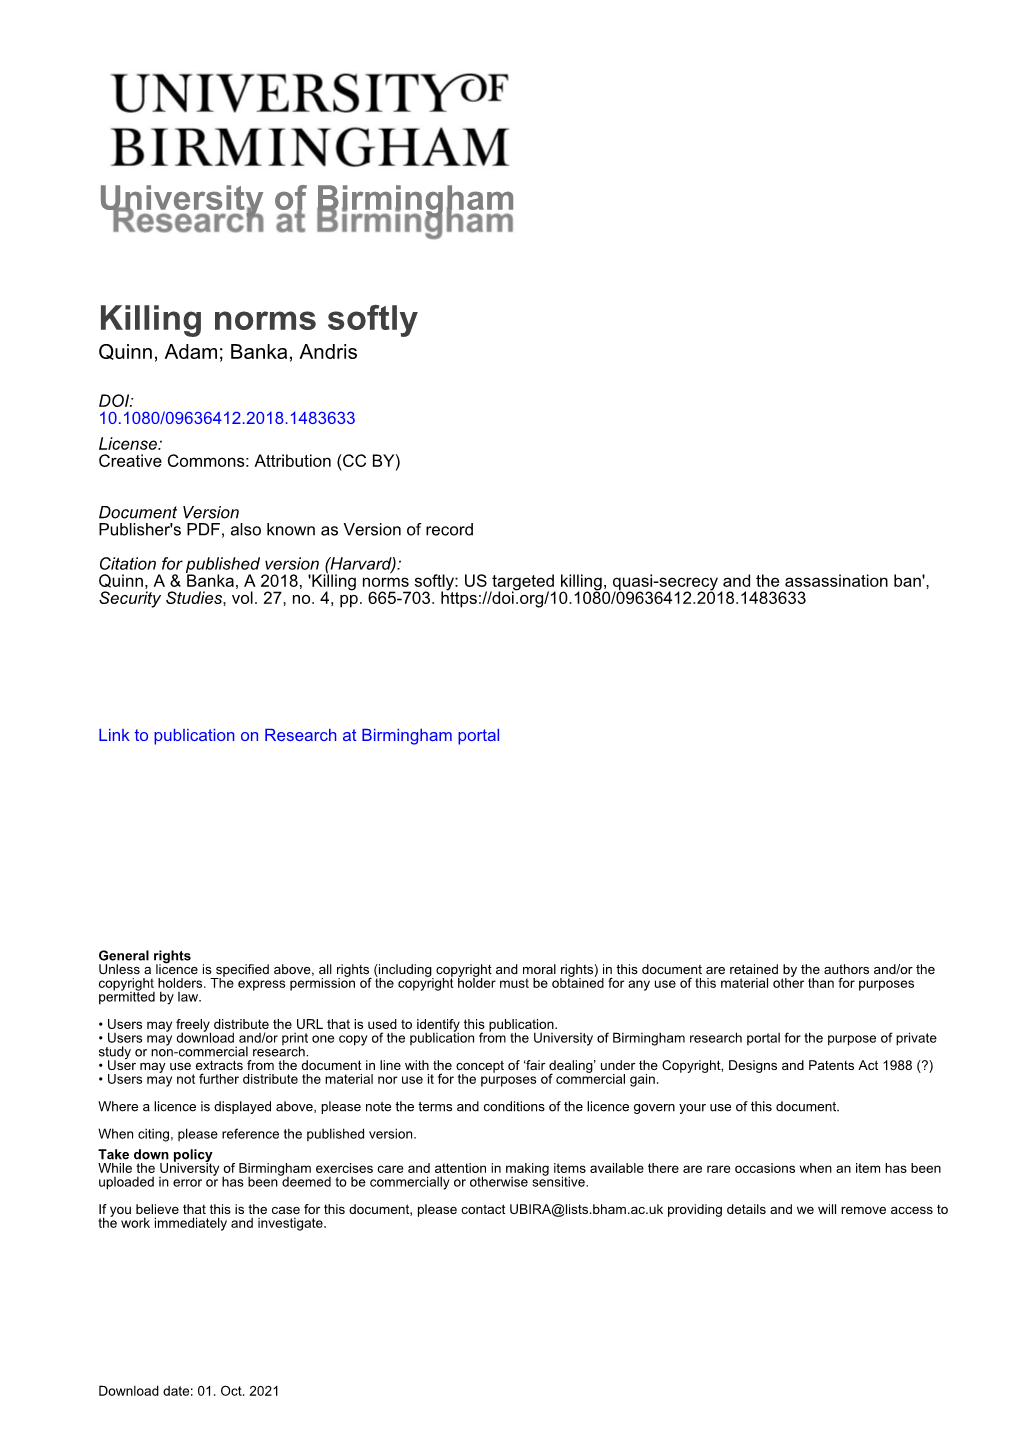 US Targeted Killing, Quasi-Secrecy and the Assassination Ban', Security Studies, Vol